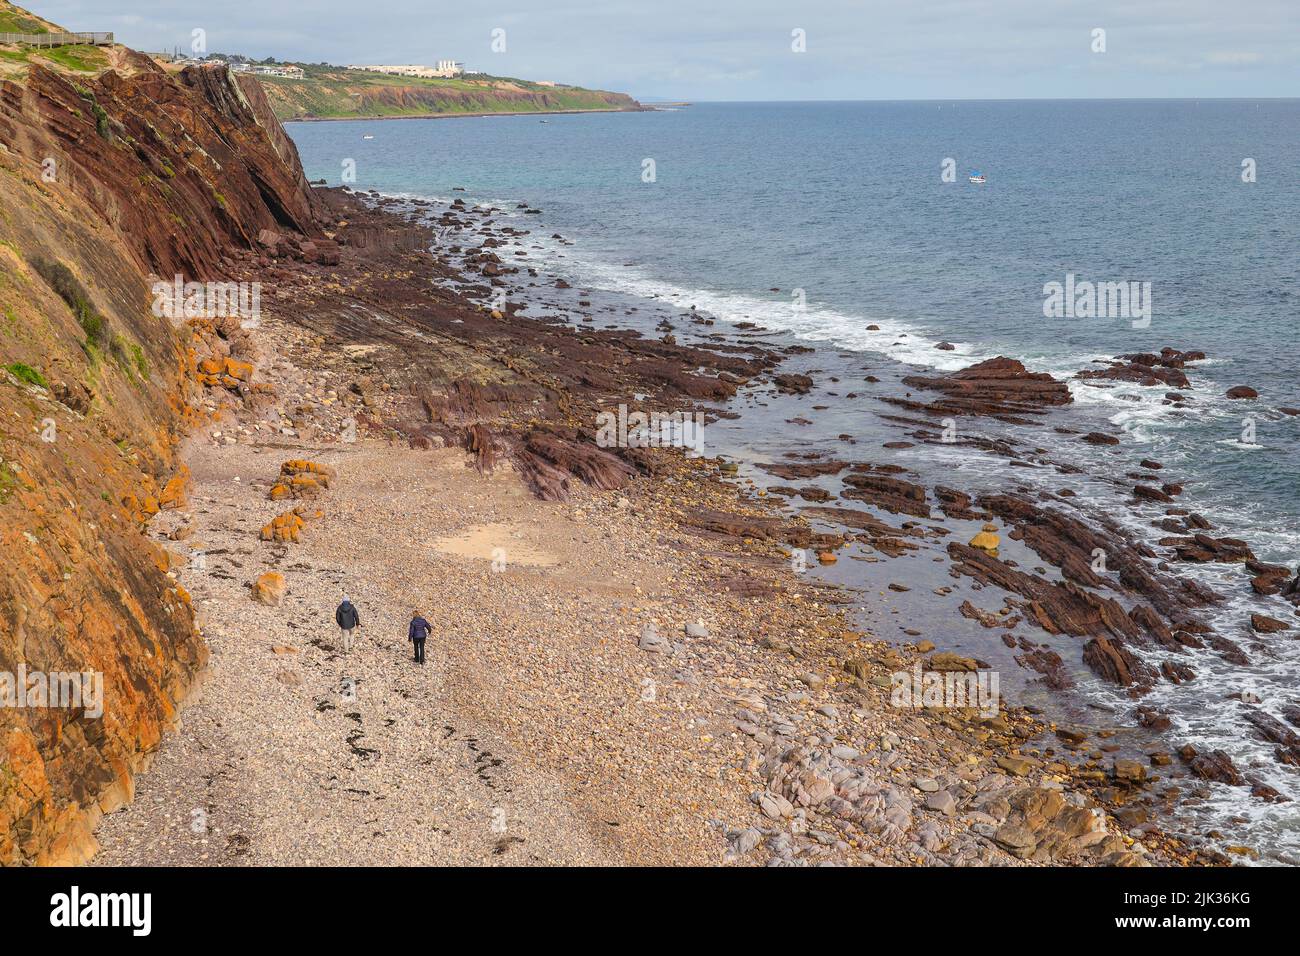 A couple walking along the rocky beach of Hallet Cove in South Australia Stock Photo